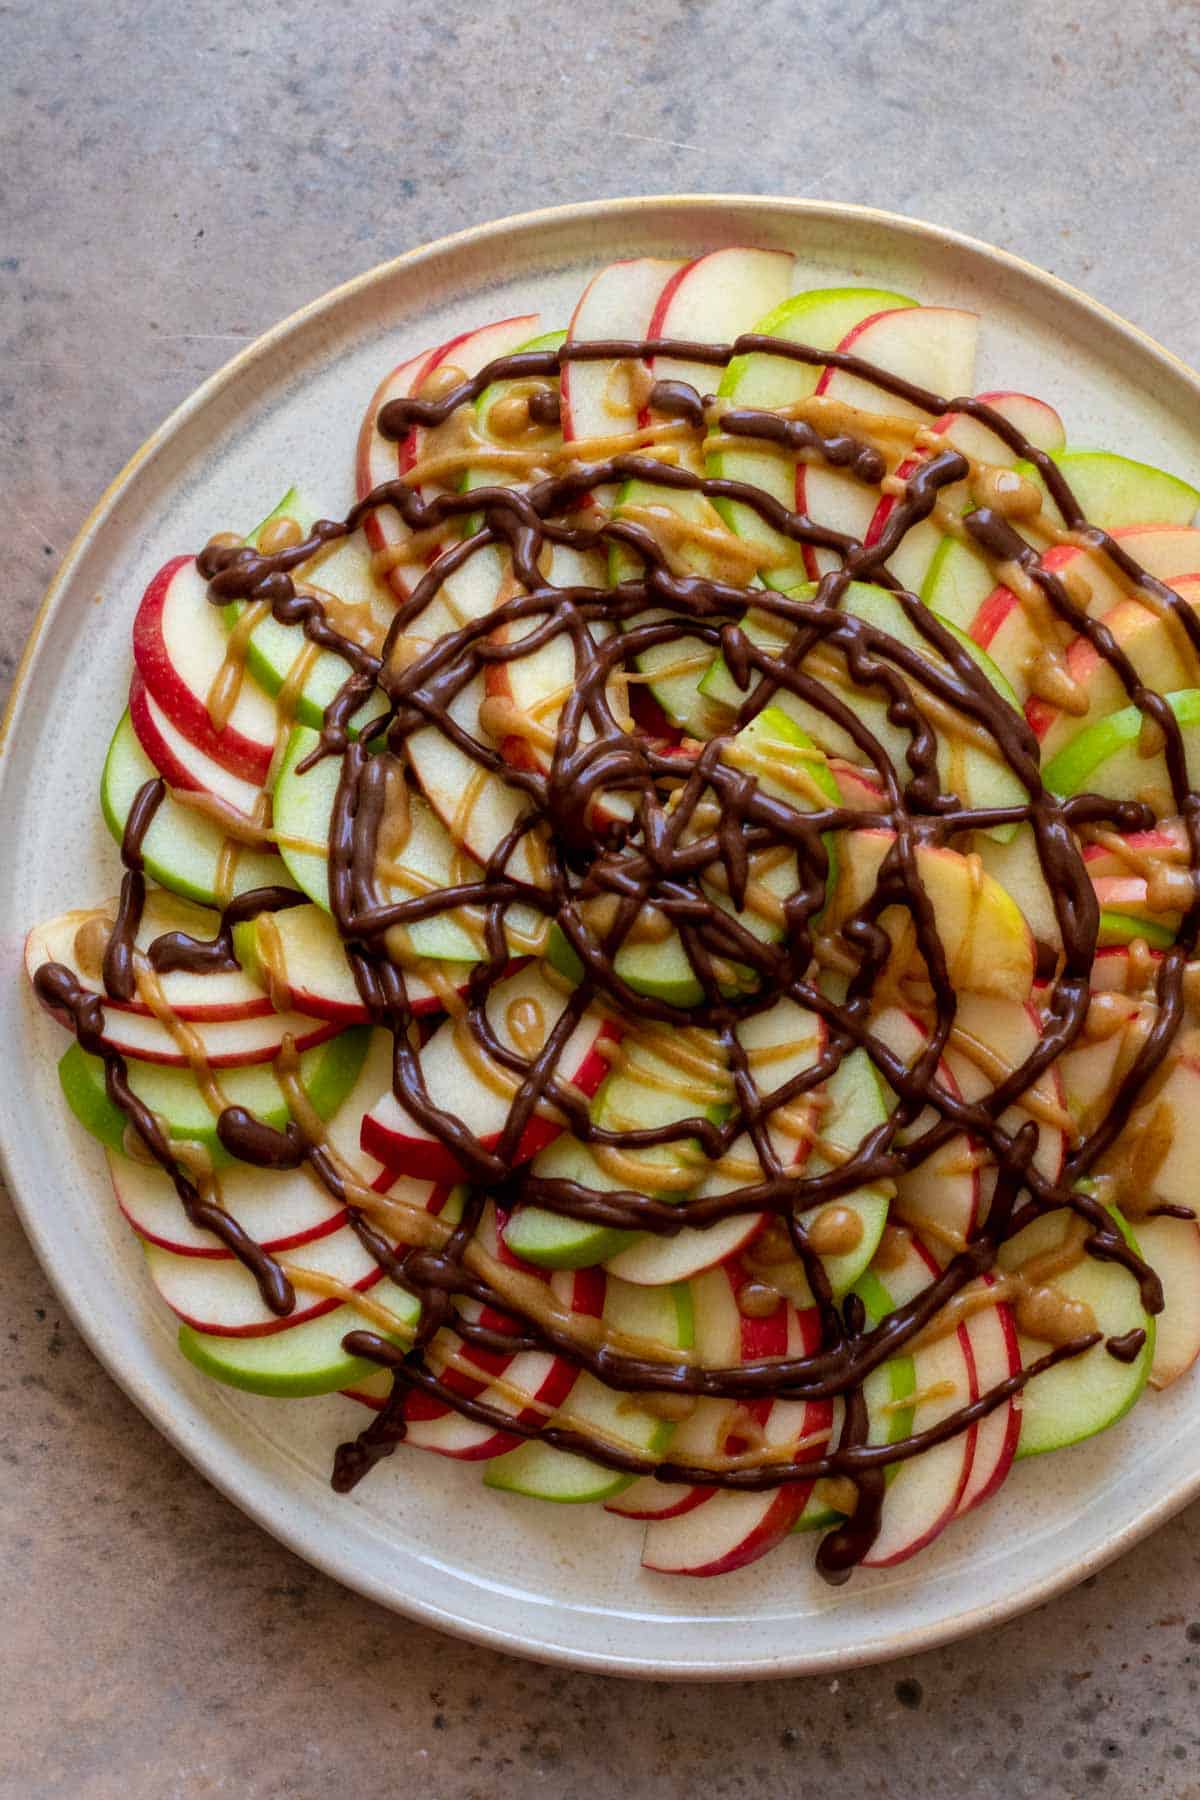 Apples drizzled with caramel and chocolate sauce.